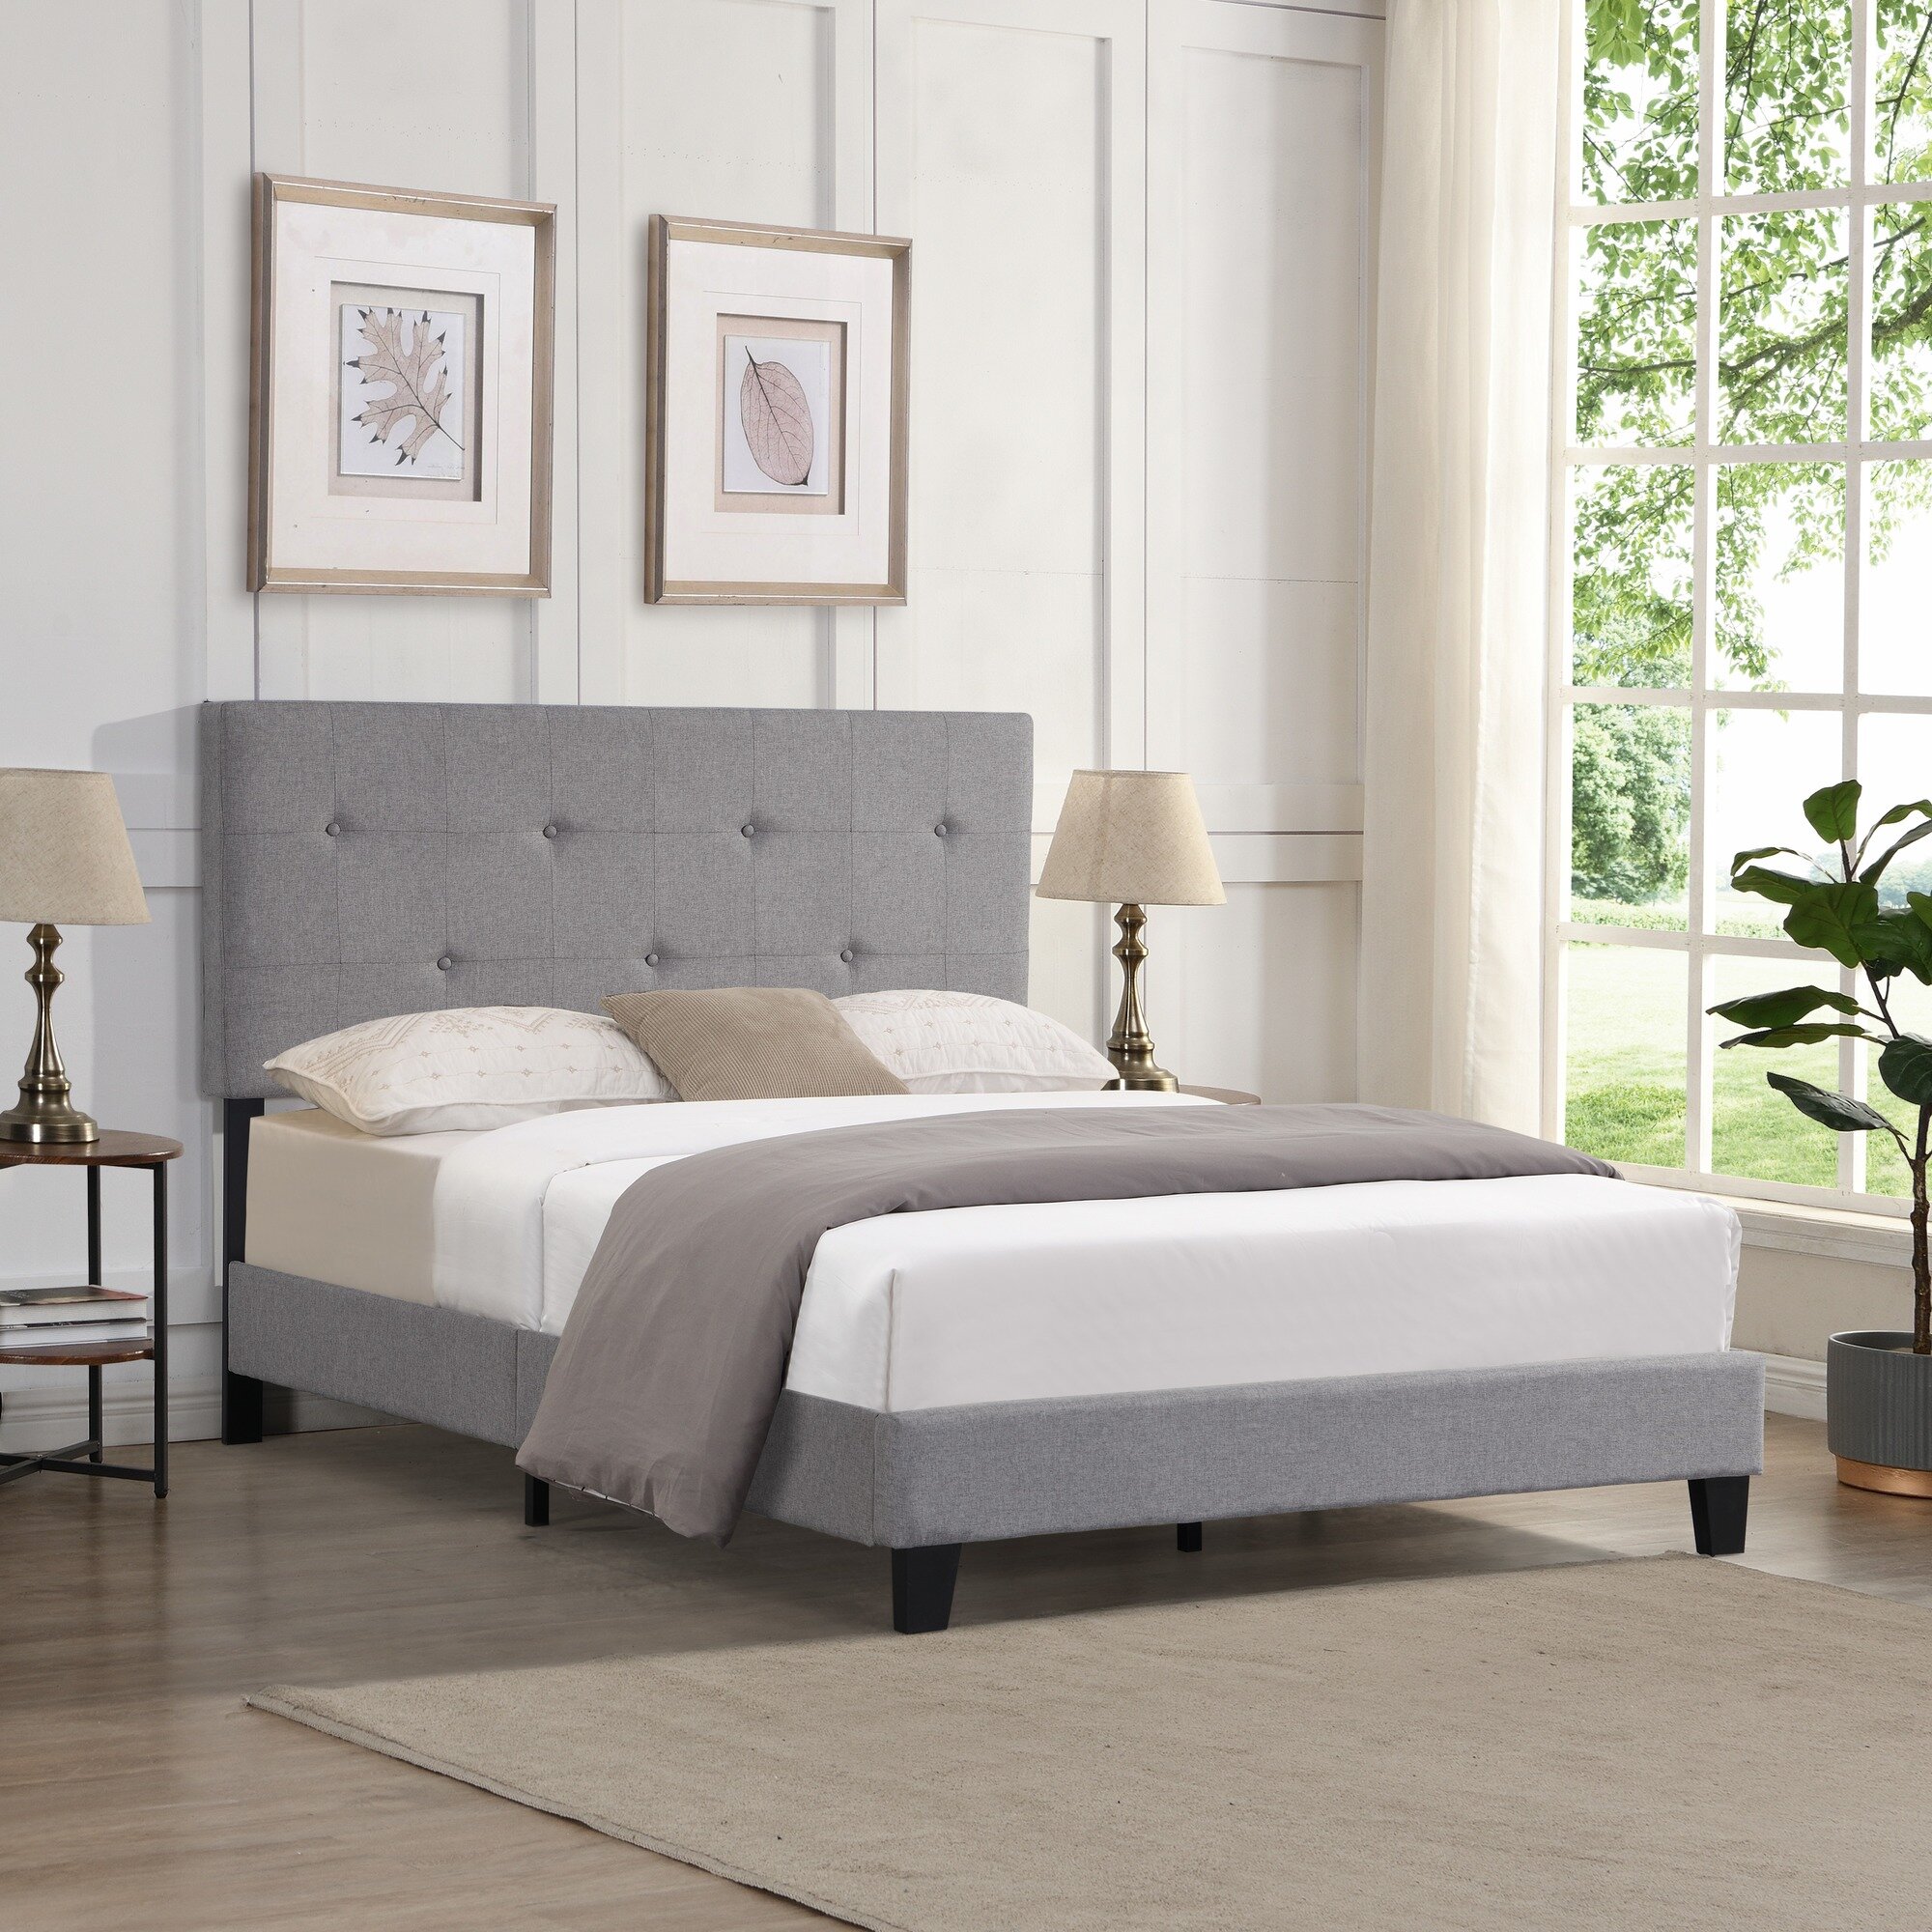 Details about   Full/Queen Size Platform Bed Frame With Headboard Upholstered Tufted Wooden Slat 